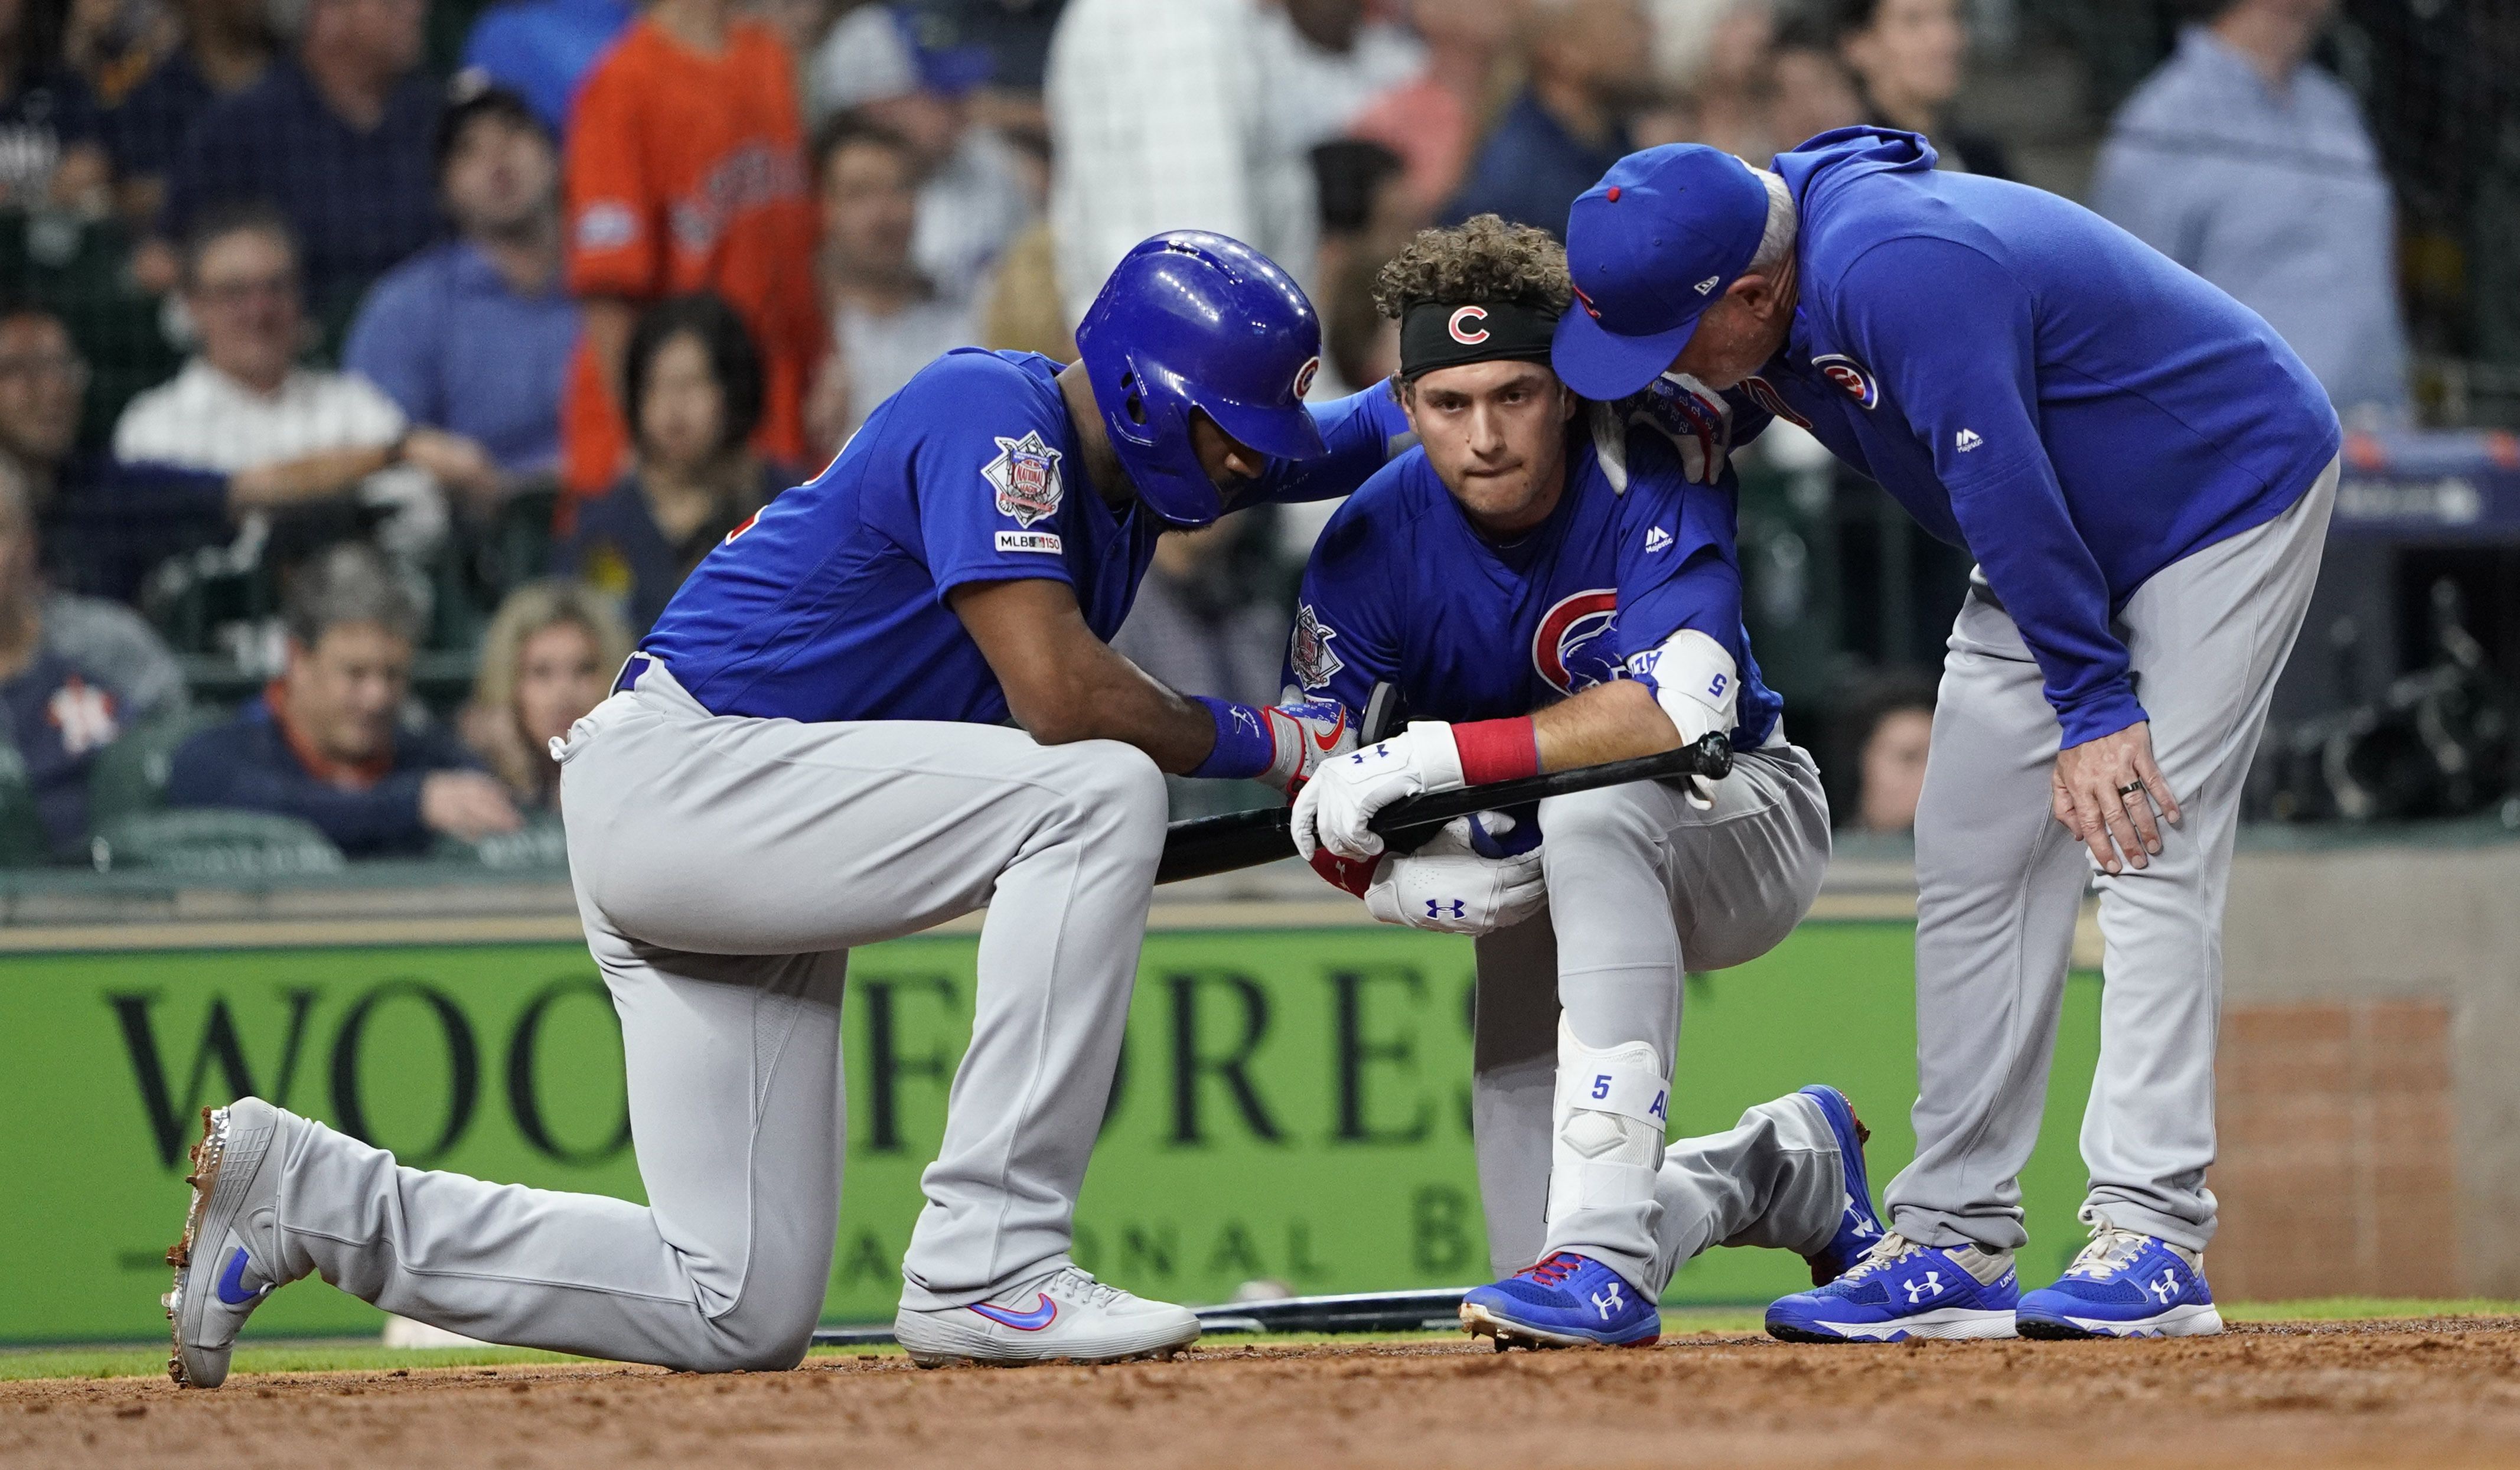 A foul ball hit by Chicago Cubs' Albert Almora Jr. injures a child